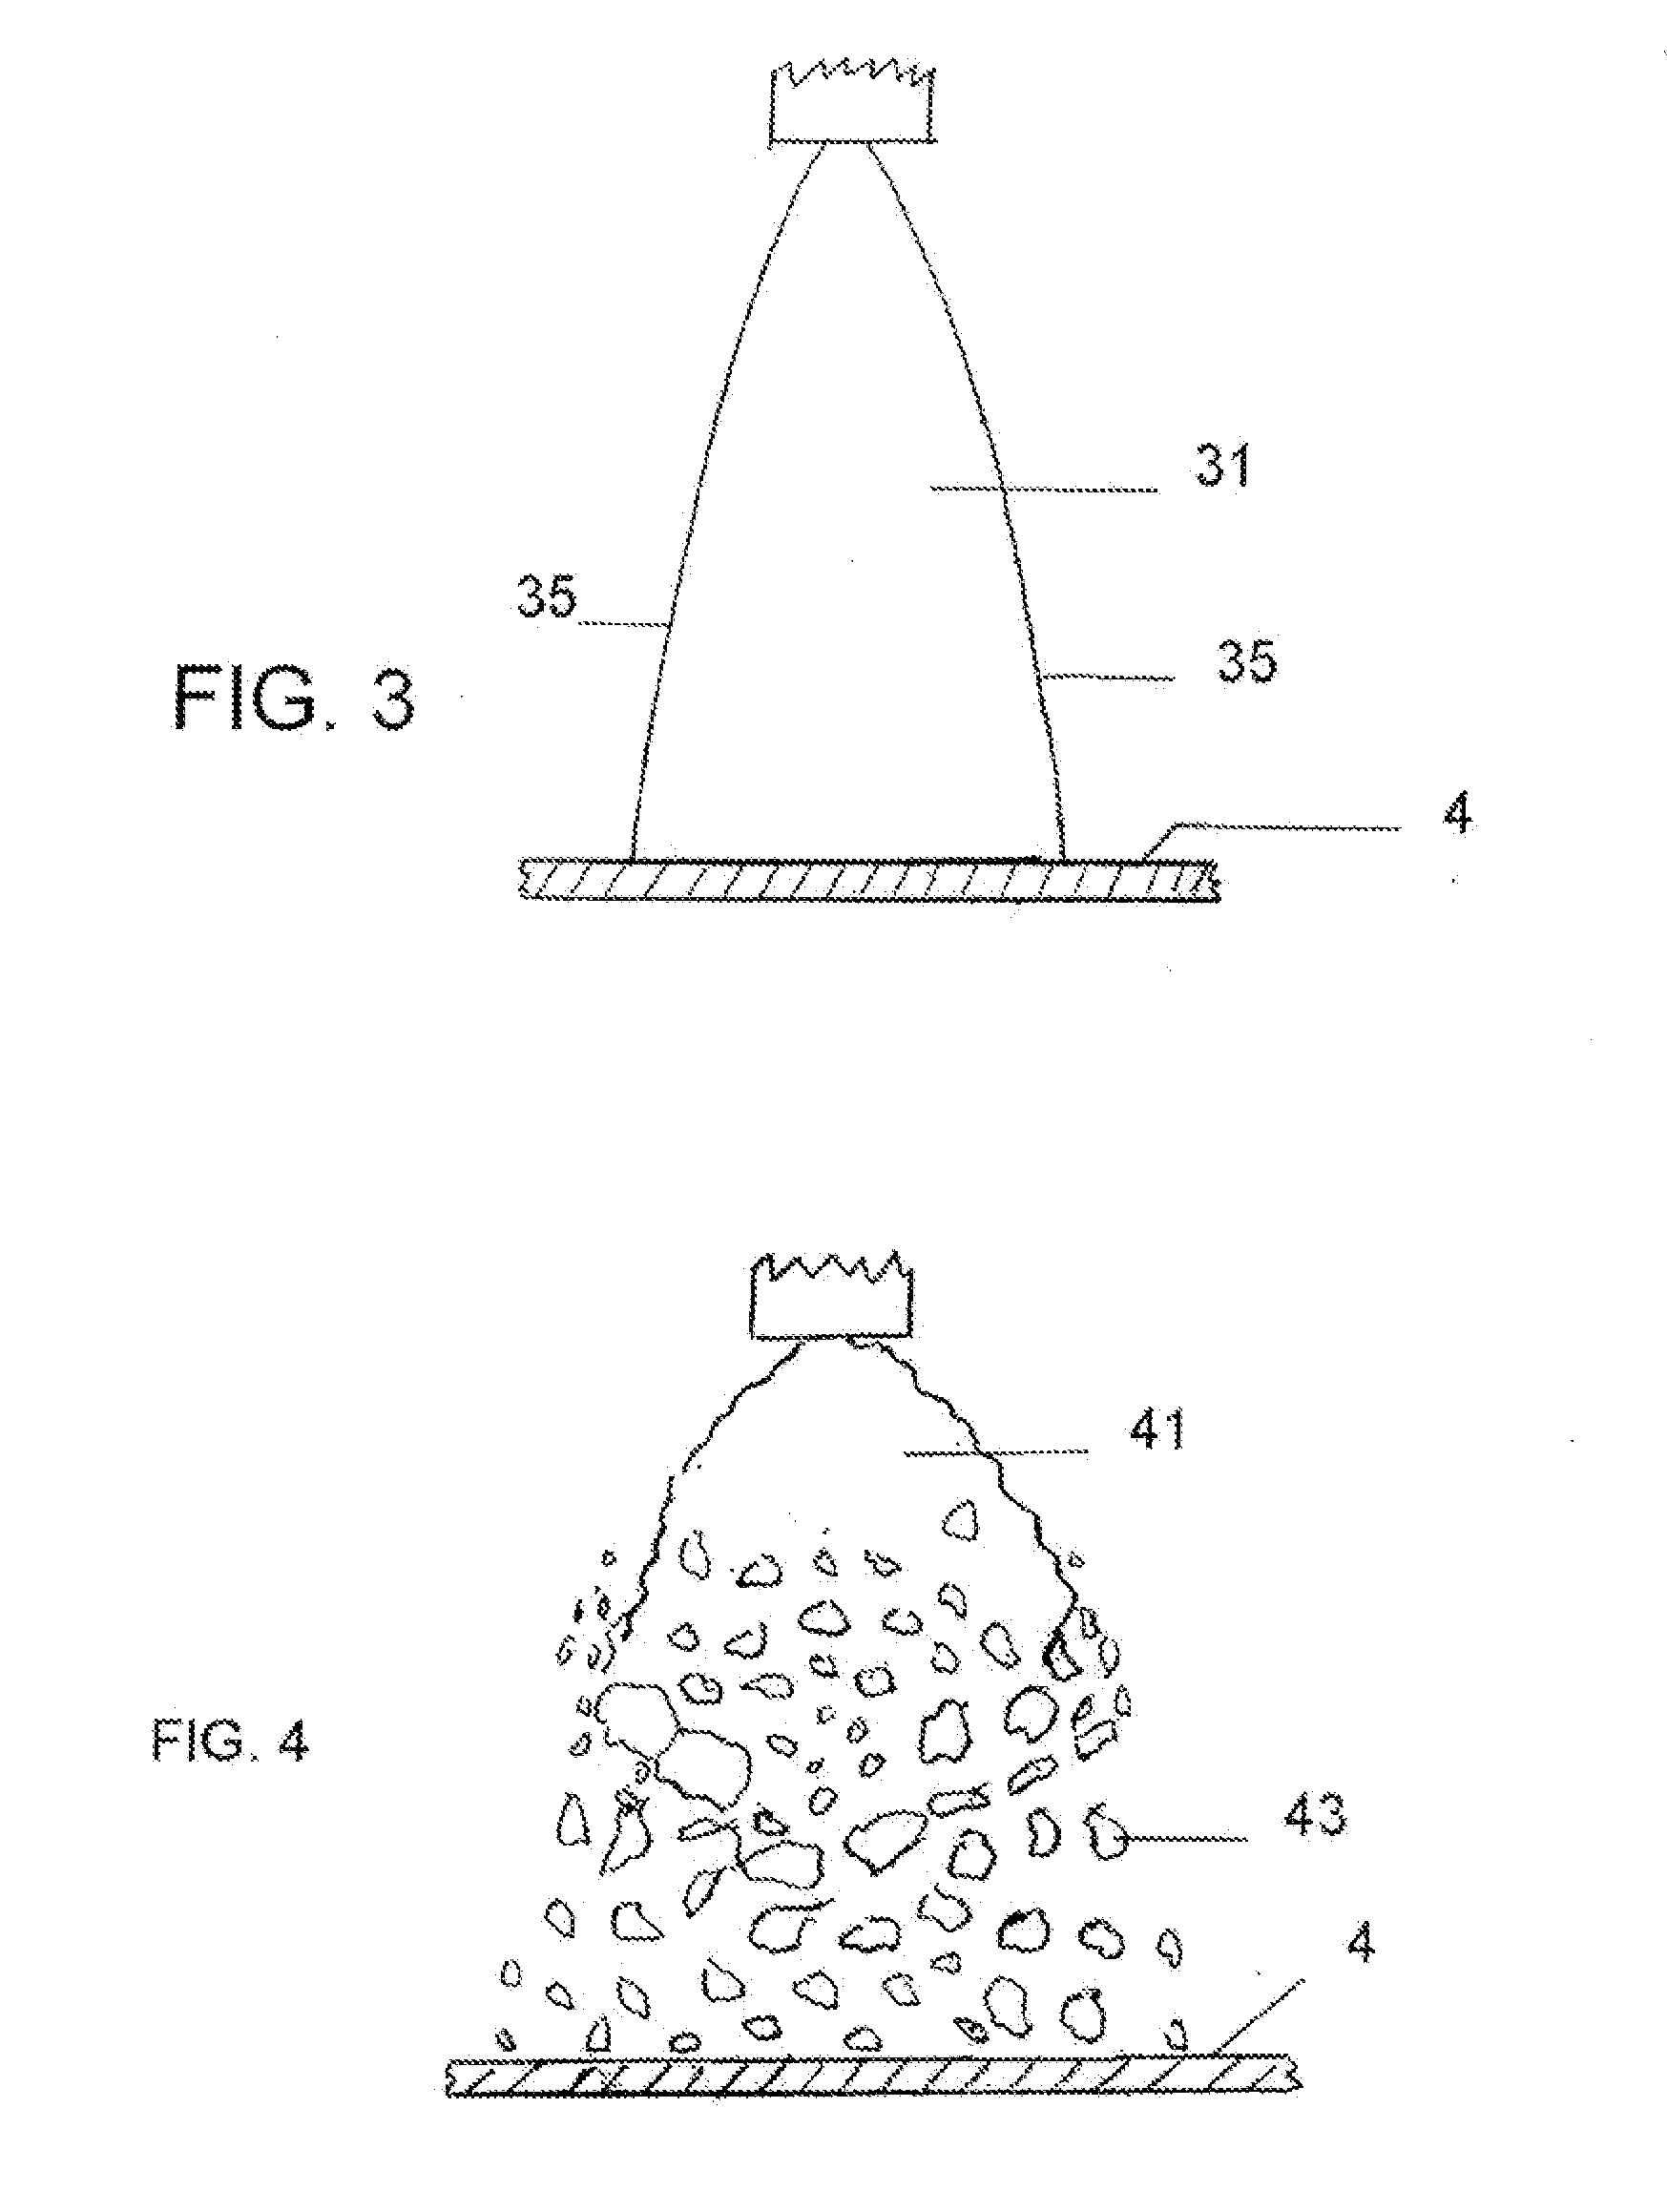 Airless spray-coating of a surface with an aqueous architectural coating composition